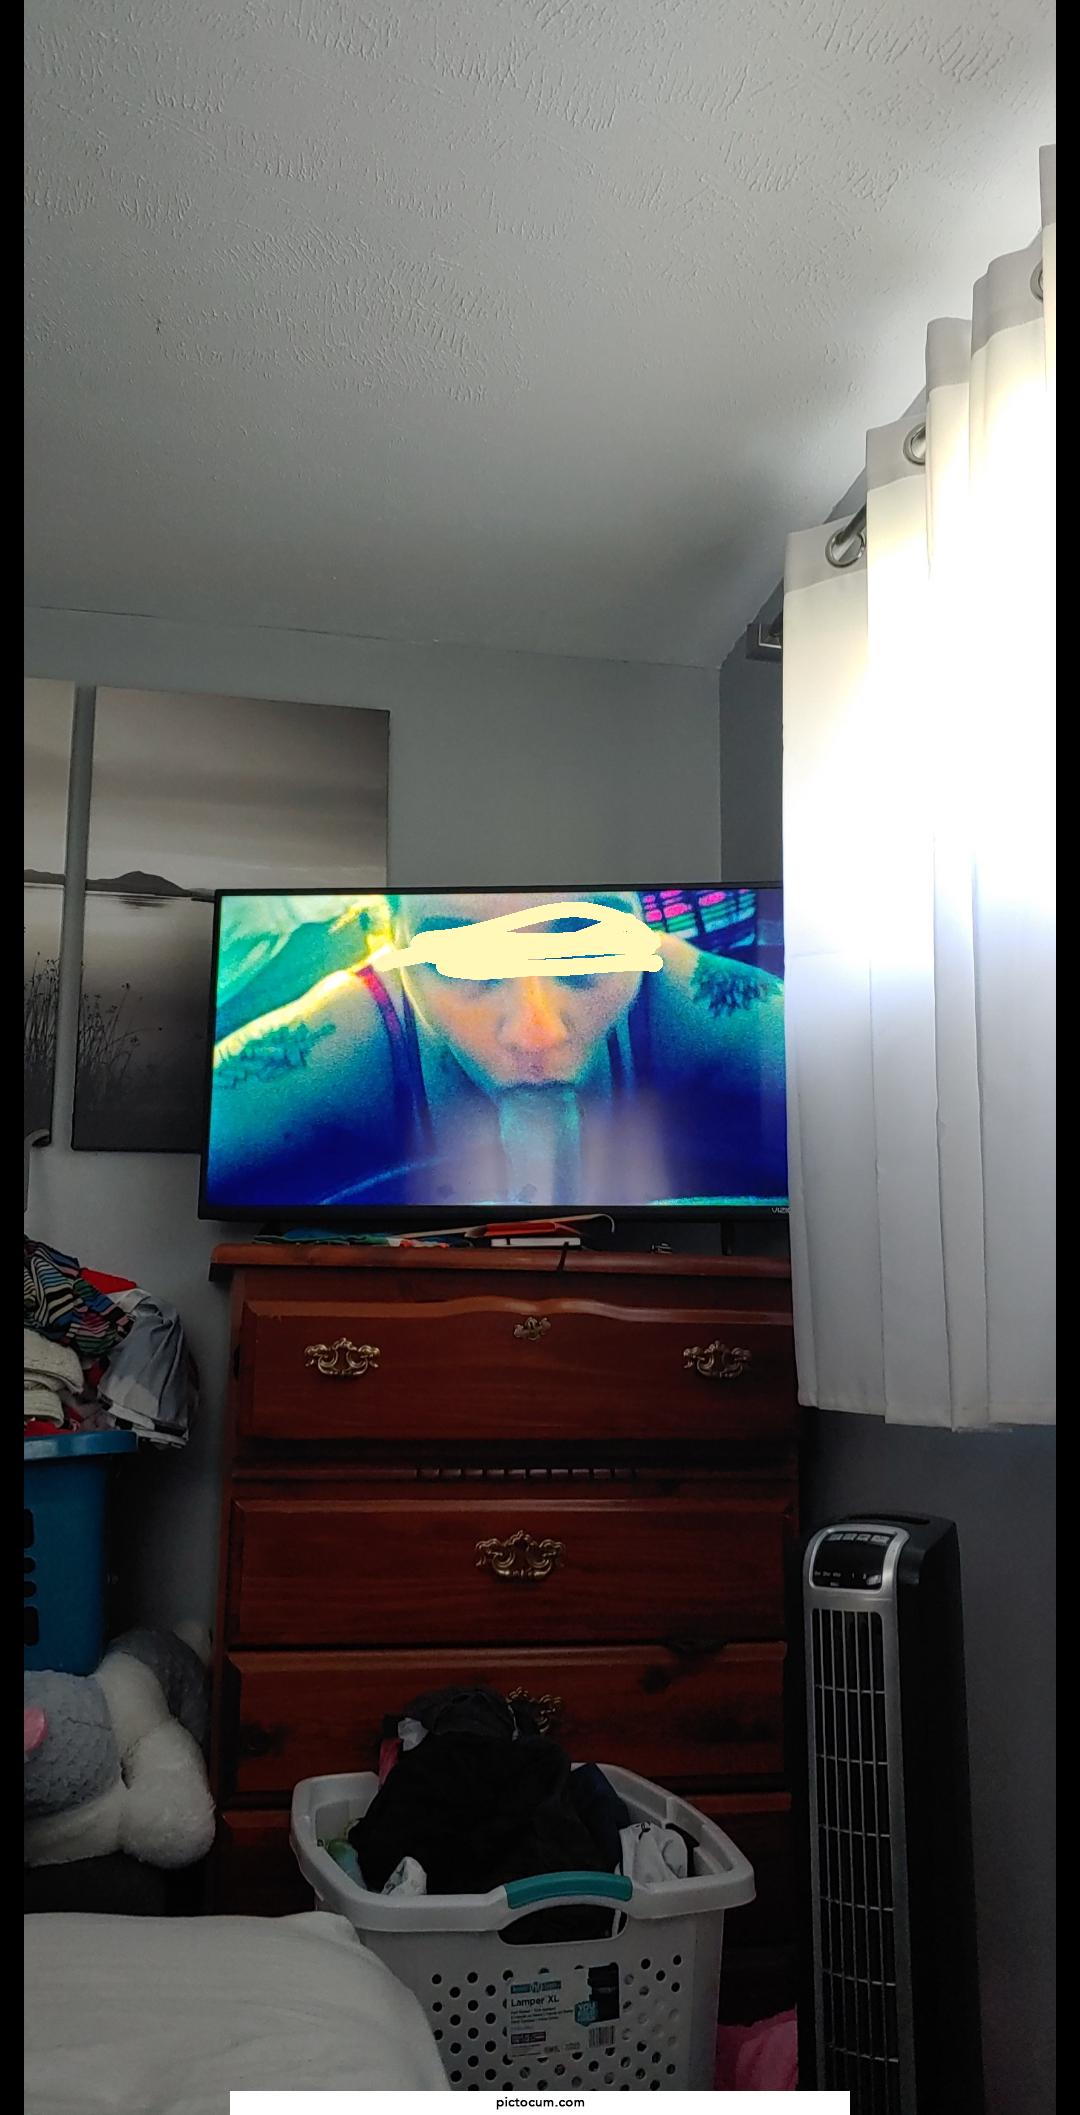 Love casting my wifes adventures to our bedroom tv to watch her suck a random dick as she sucks mine!!!